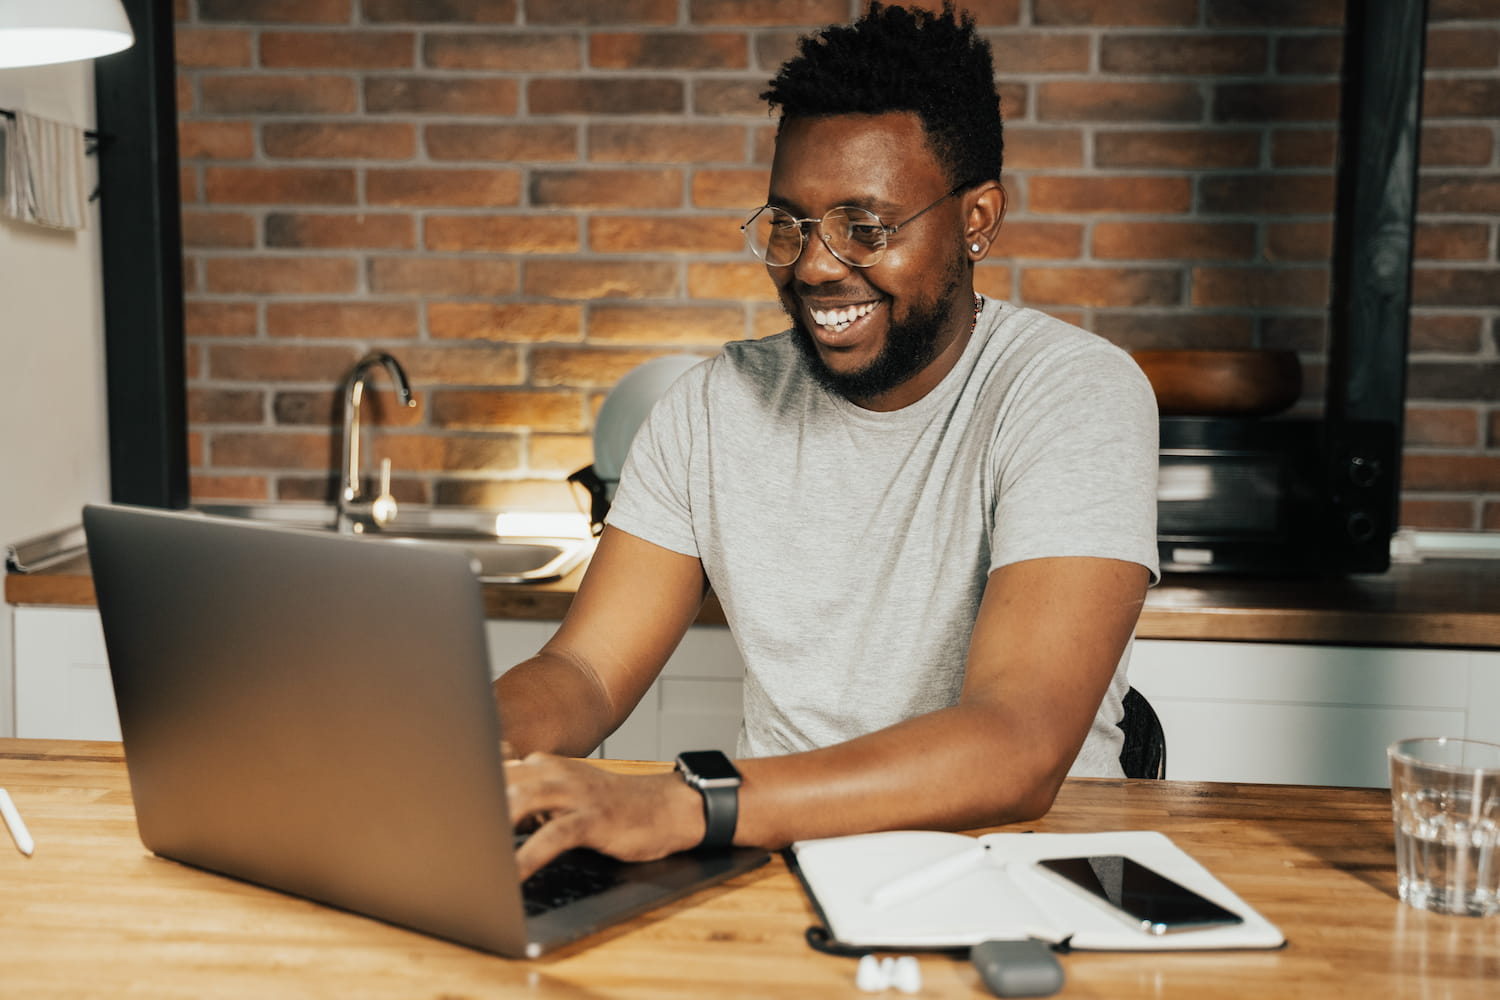  Remote workers is exemplified with a remote employee who enjoys connecting virtually.